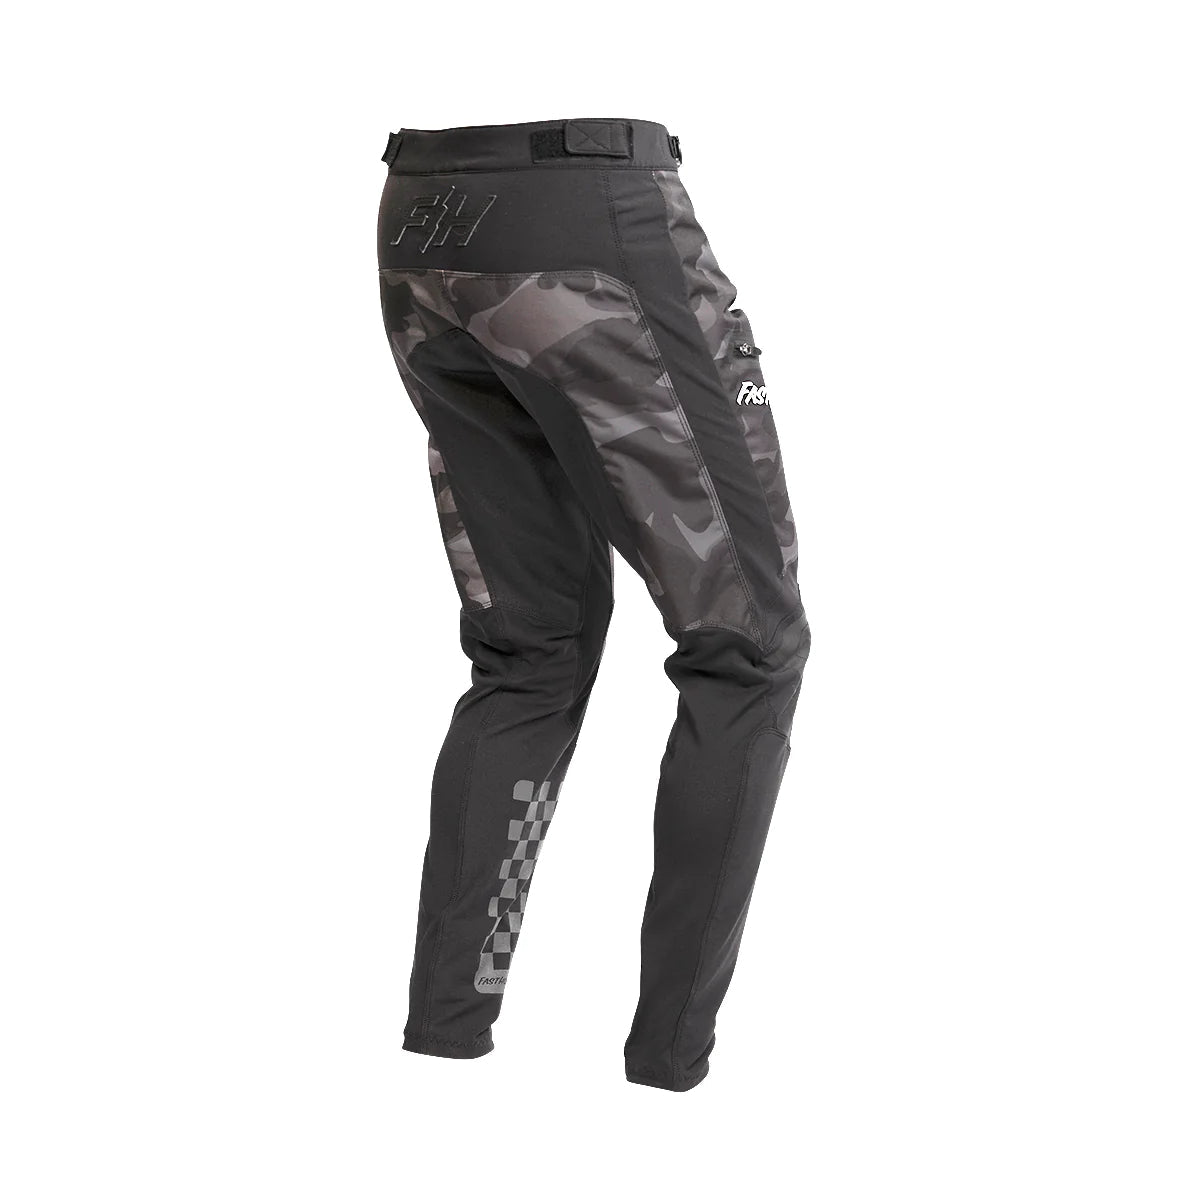 Fasthouse Youth Fastline 2.0 Pants - Mountain Kids Outfitters: Black Camo, Back View